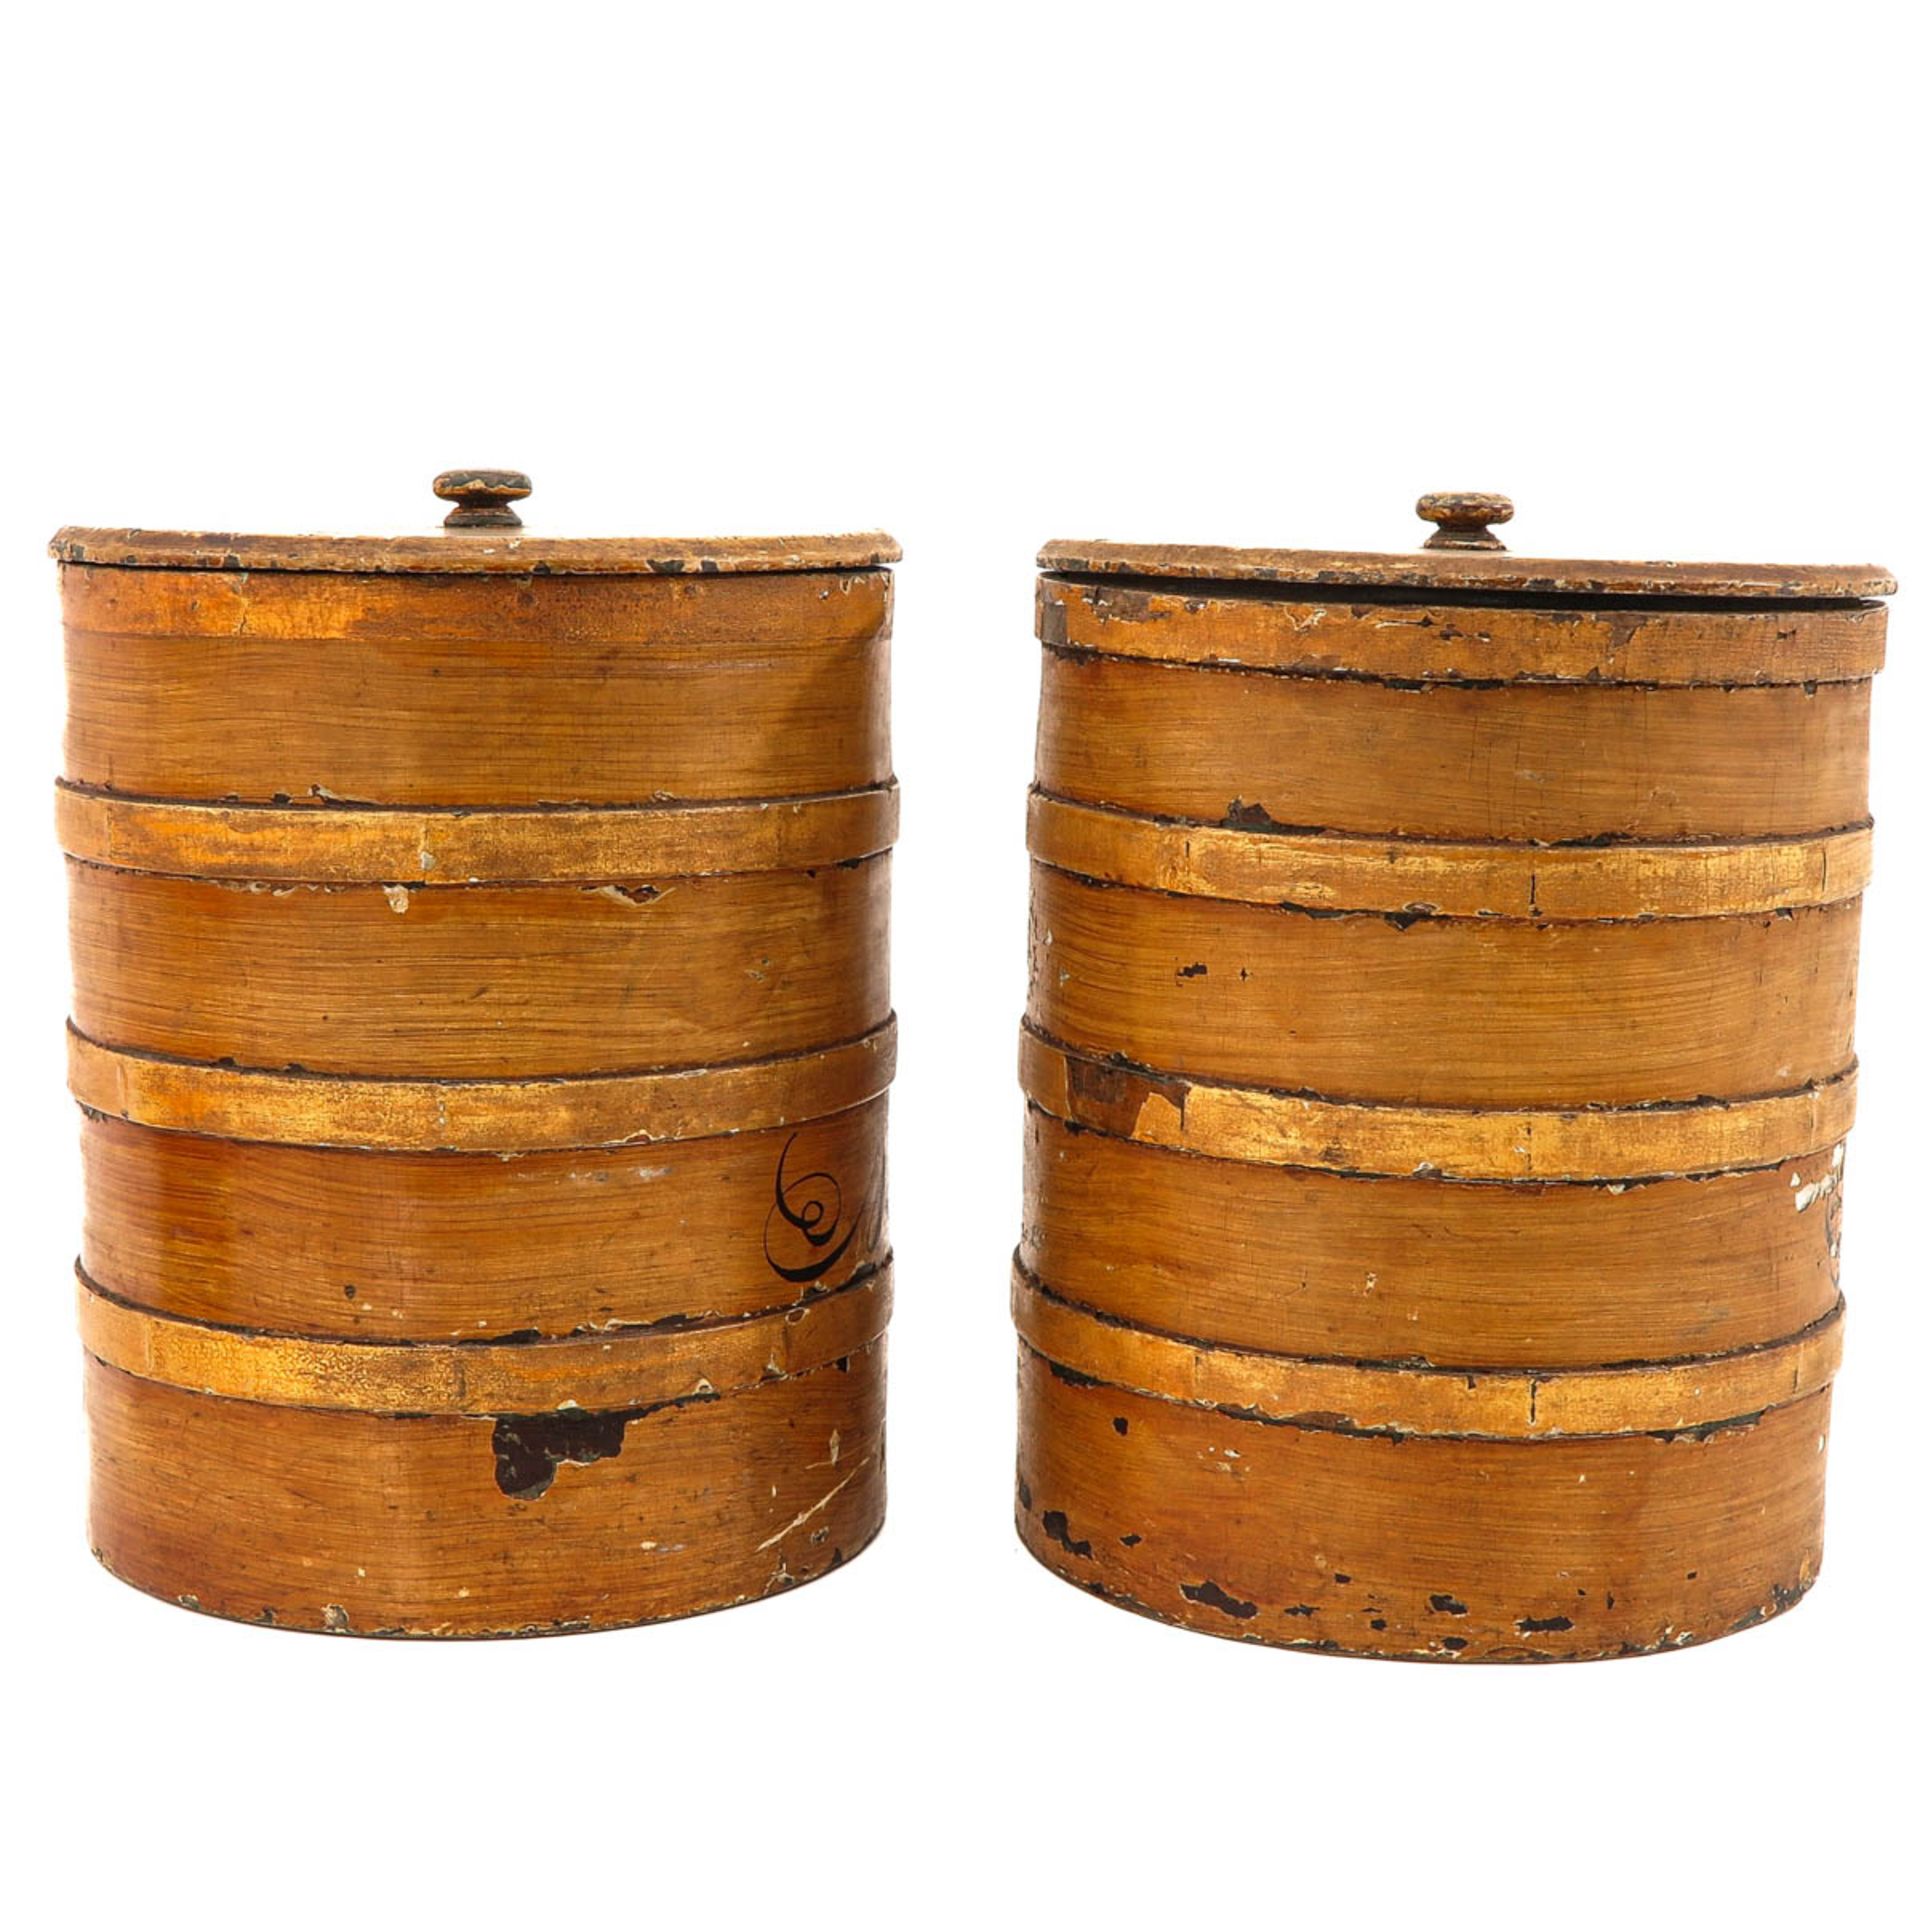 A Pair of Wooden Barrels - Image 4 of 9